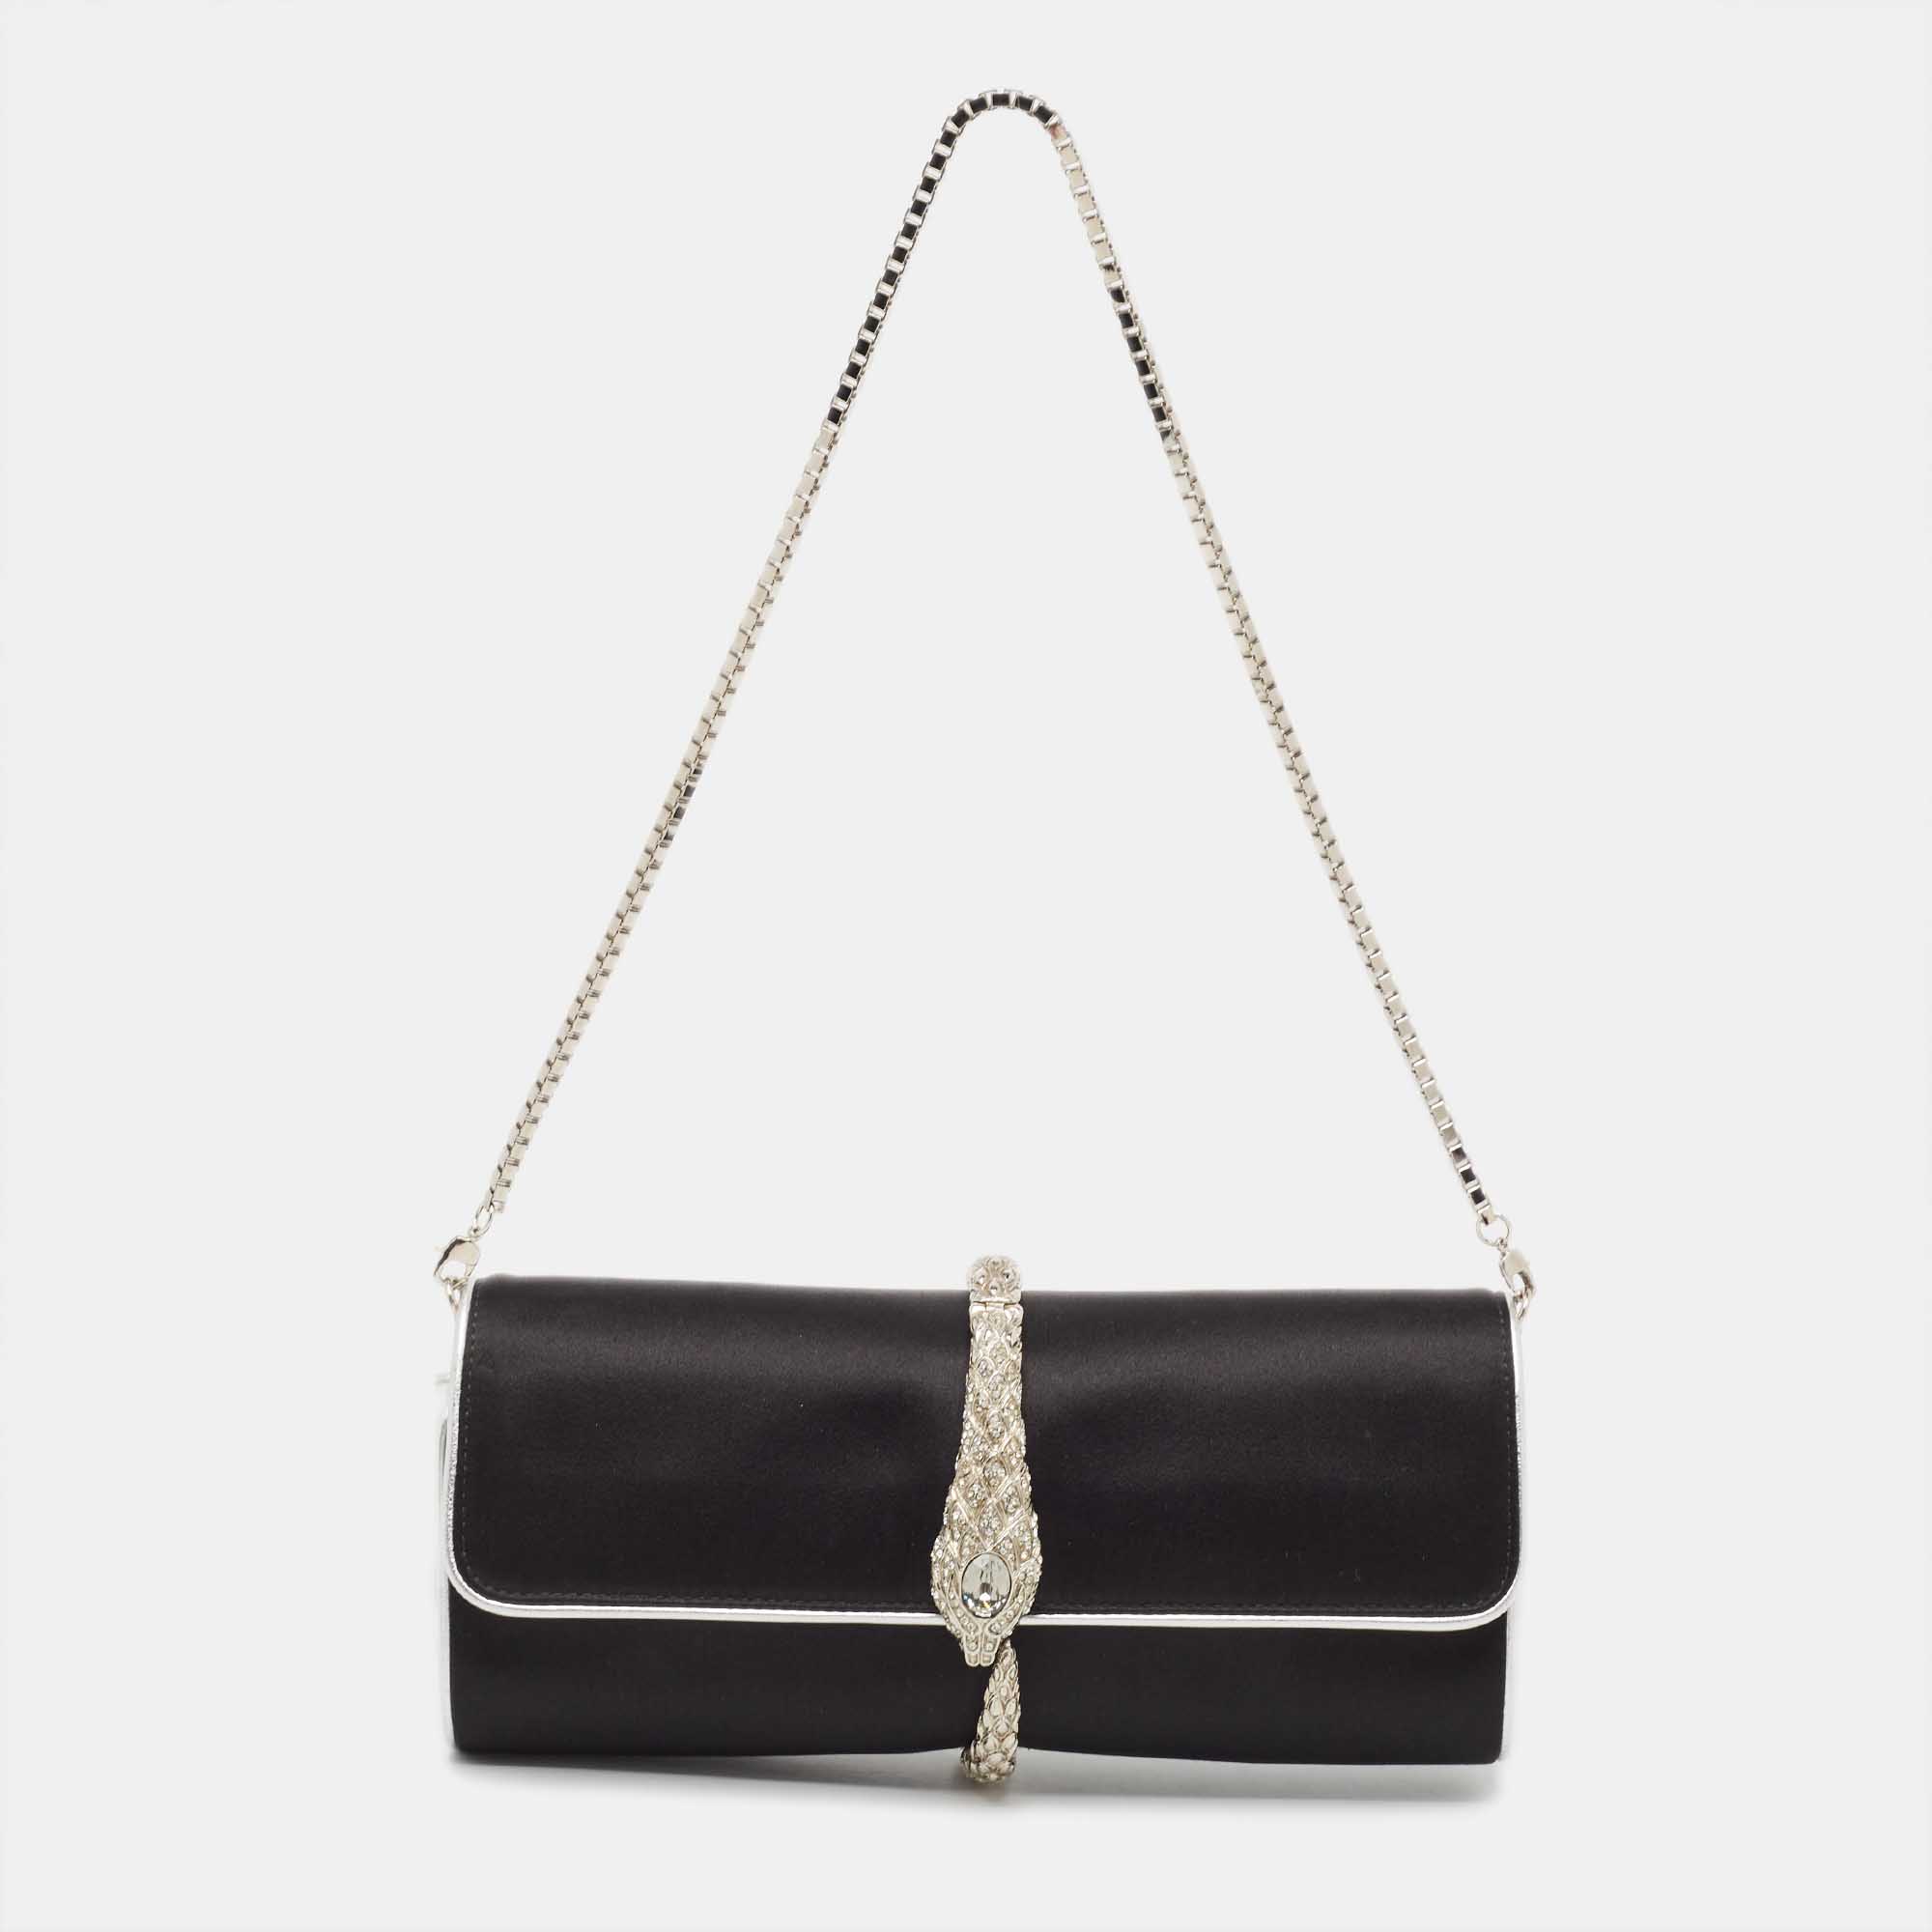 

Roberto Cavalli Black/Silver Satin and Leather Snake Embellished Chain Clutch